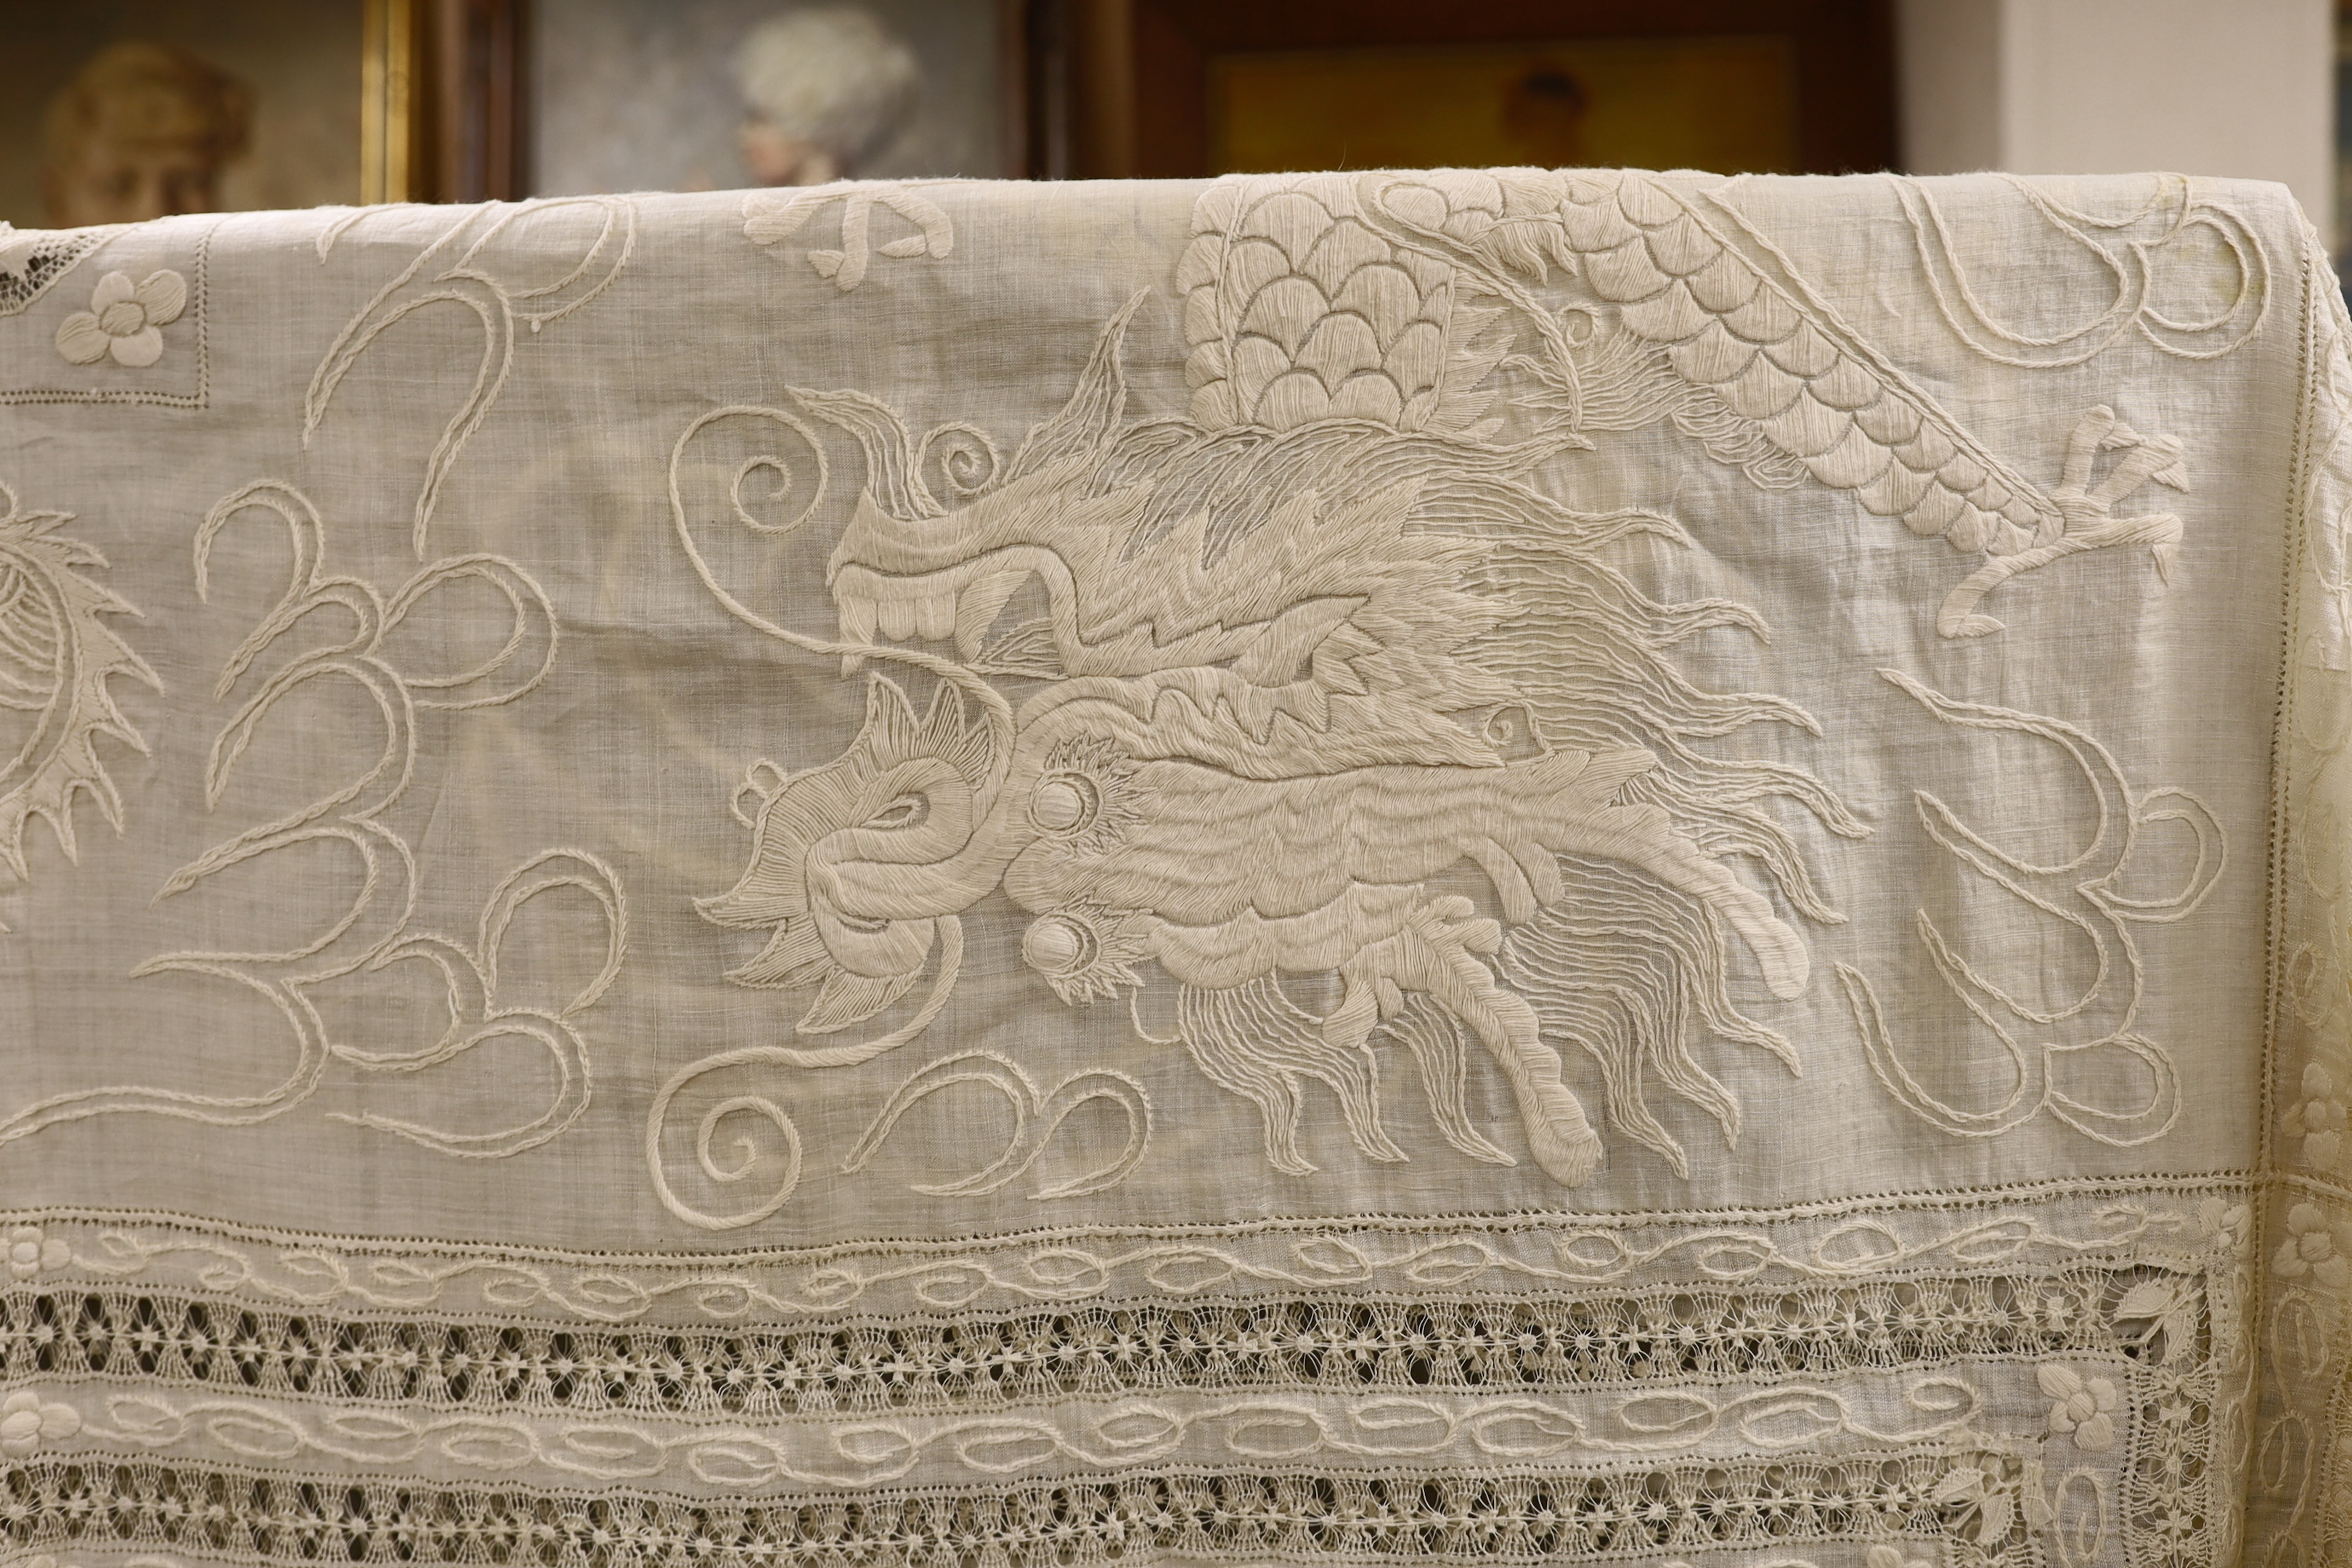 A 20th century Chinese dragon embroidered and drawn thread worked fine linen table cloth, 194cm x 240cm